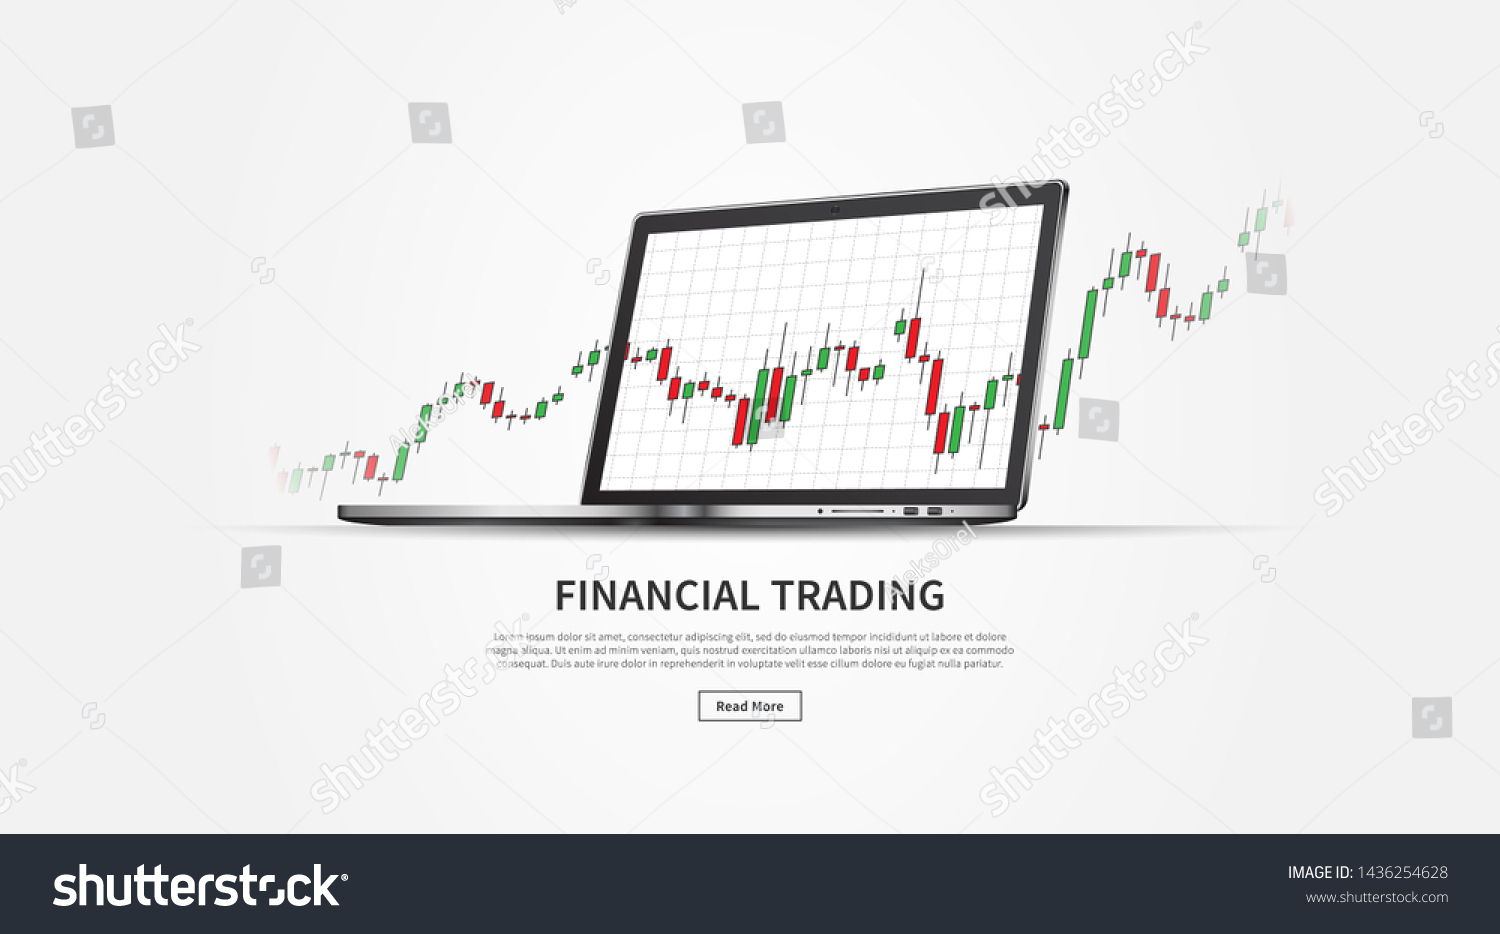 SVG of Forex stock trade promo page with laptop (notebook) vector illustration. Web banner template for trading companies graphic design. Financial chart to buy and sell for stock exchange market concept. svg